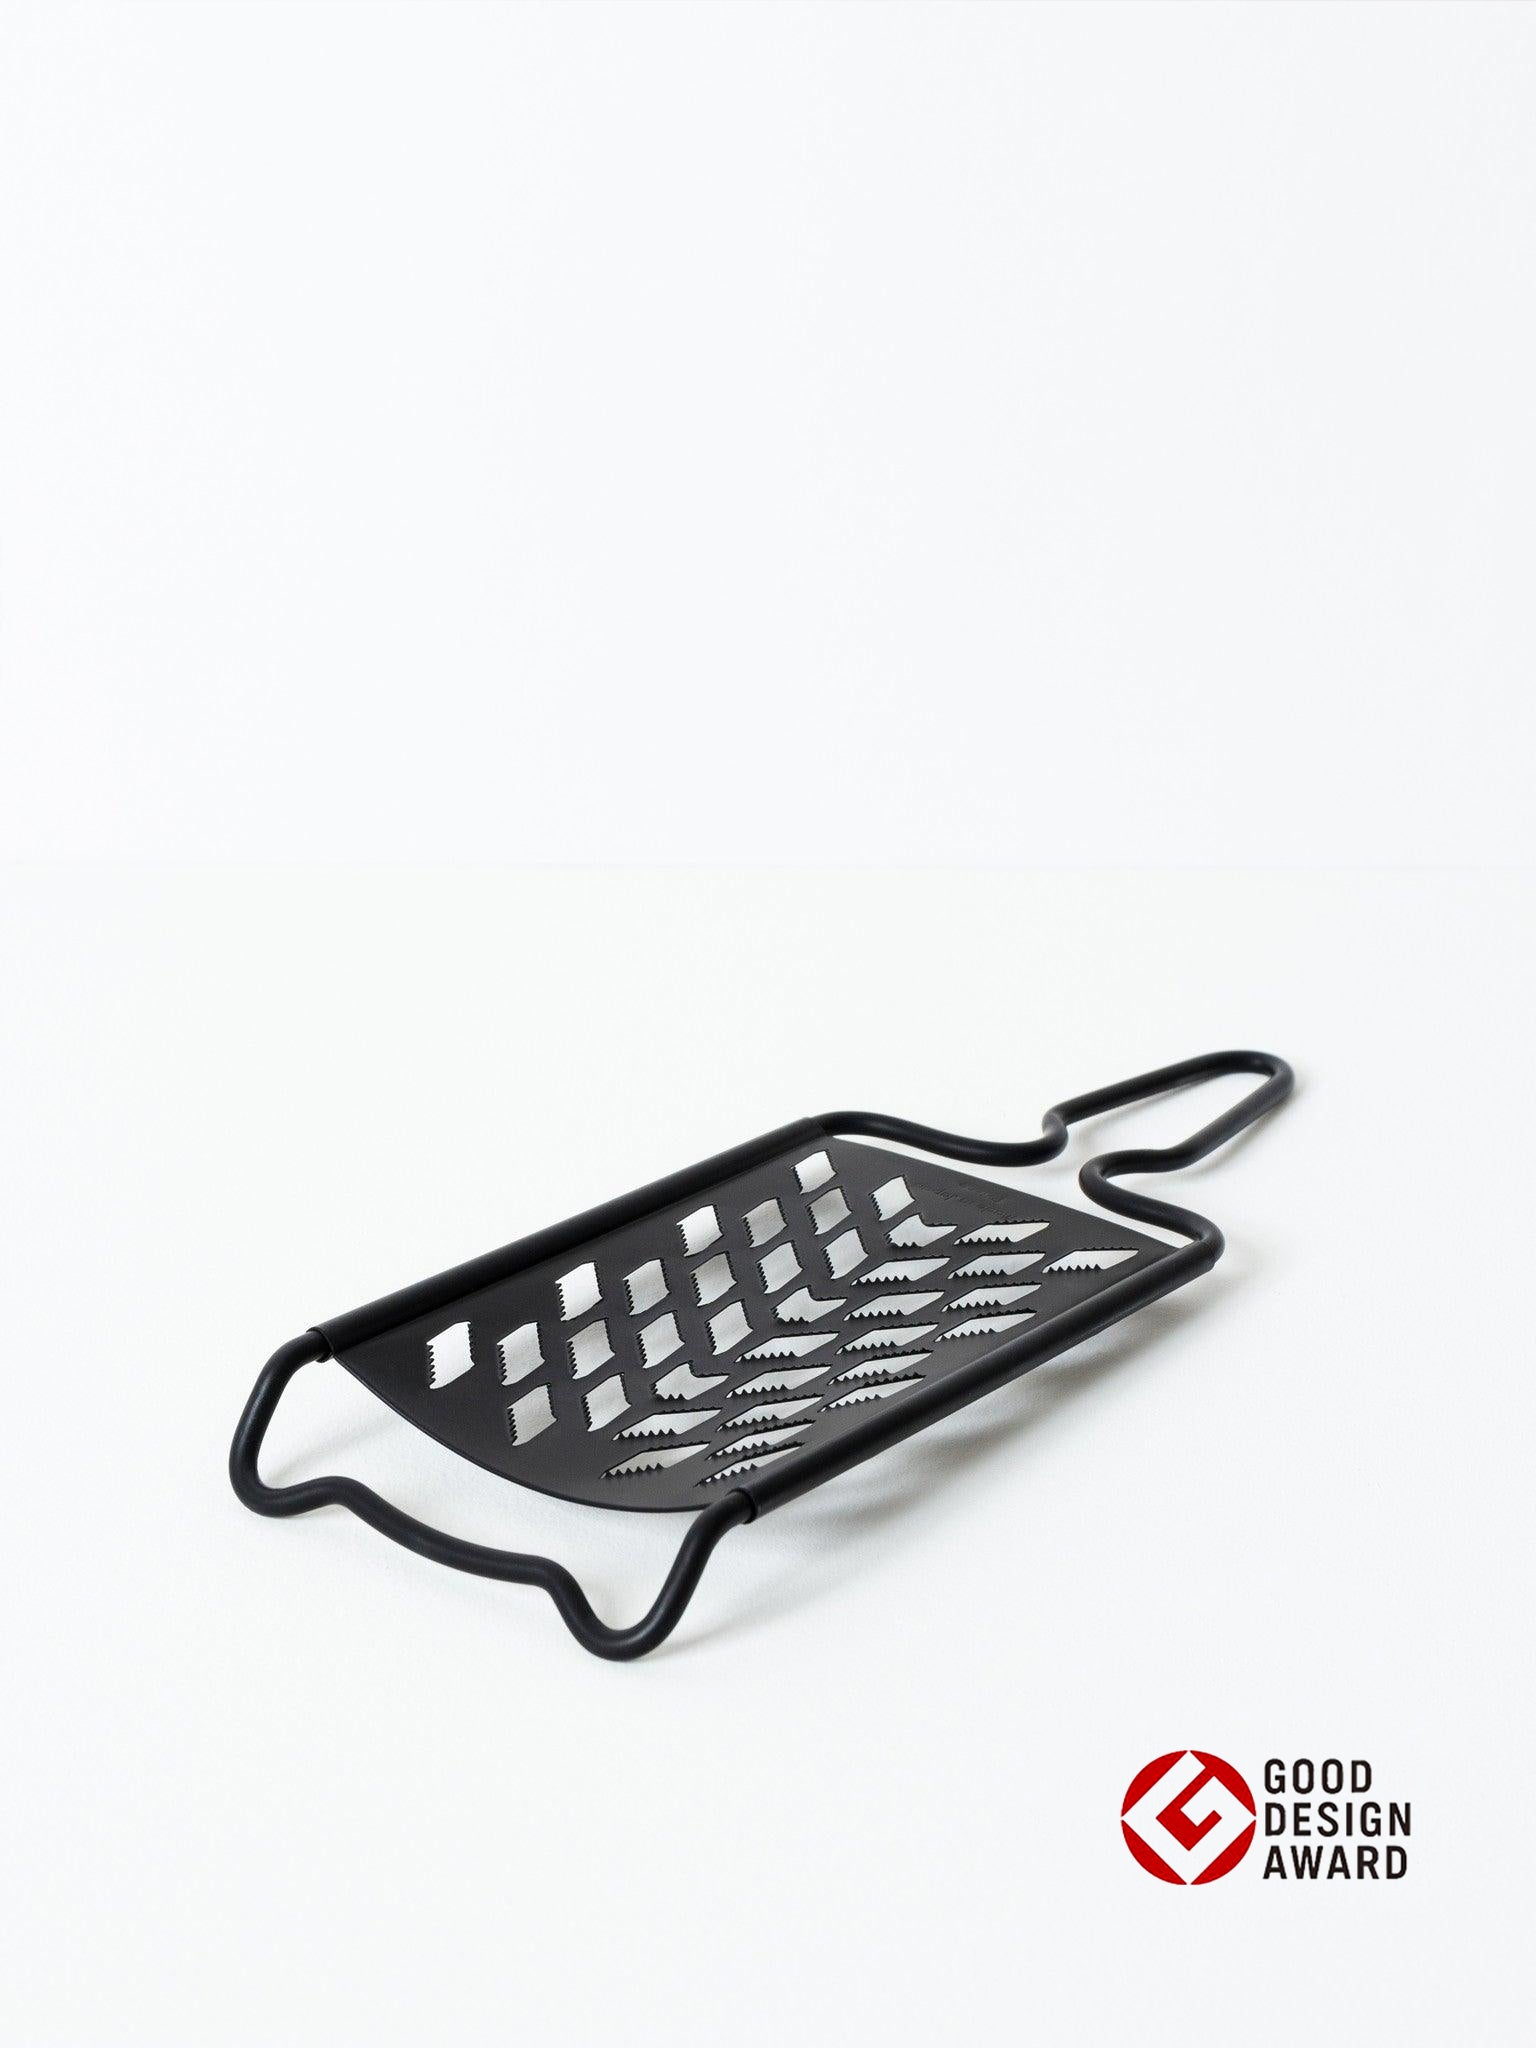 FD Style Grater